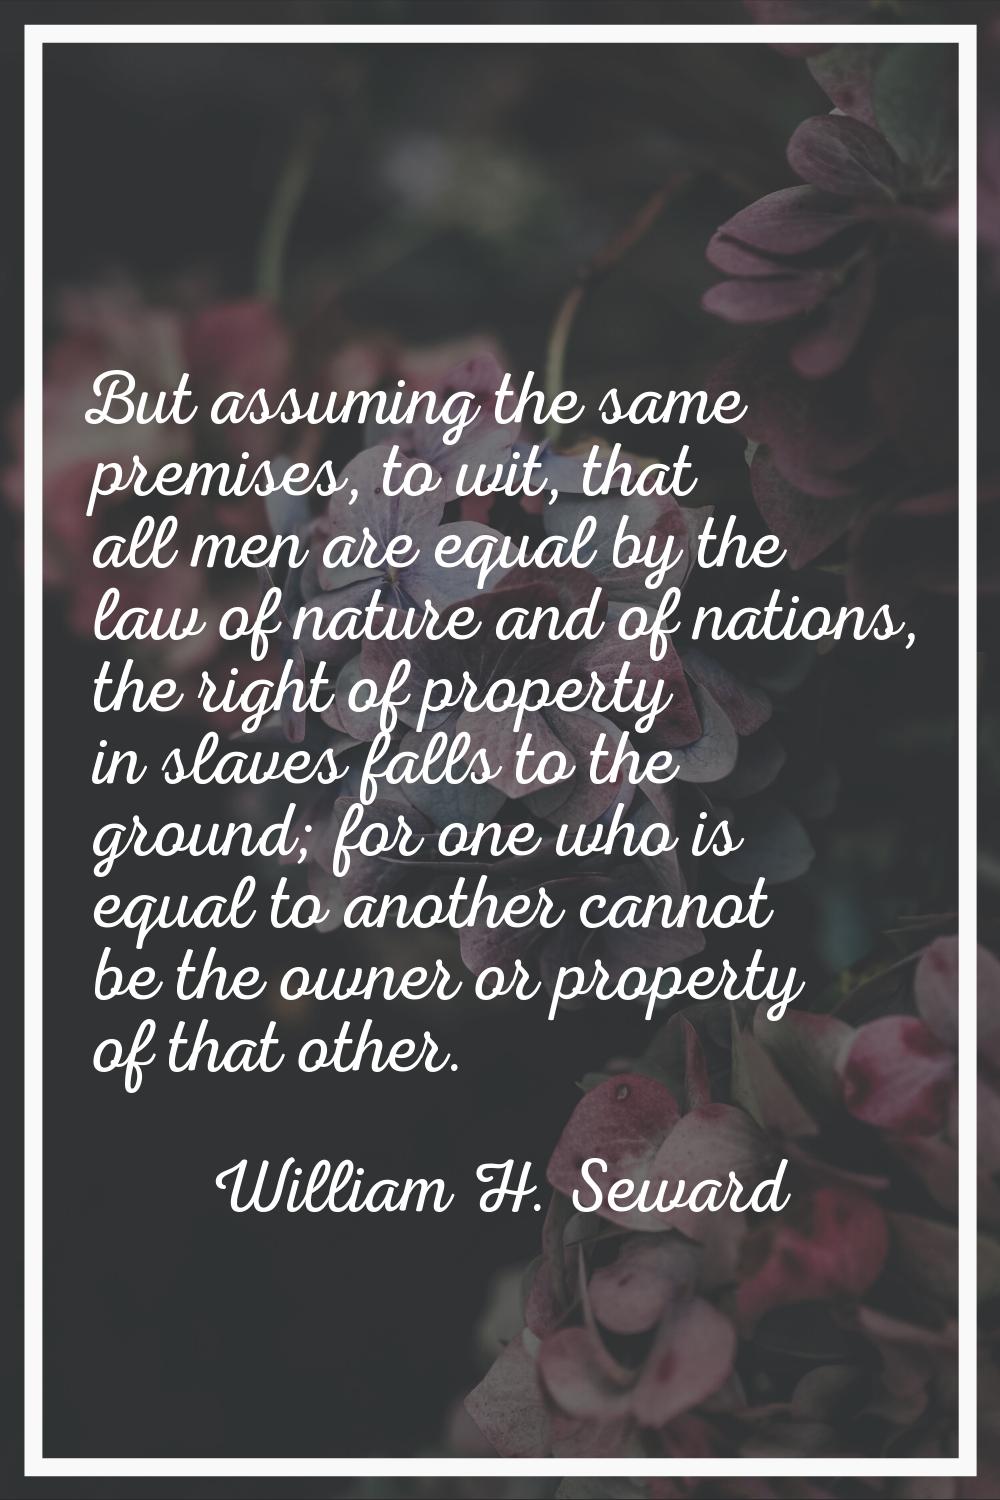 But assuming the same premises, to wit, that all men are equal by the law of nature and of nations,